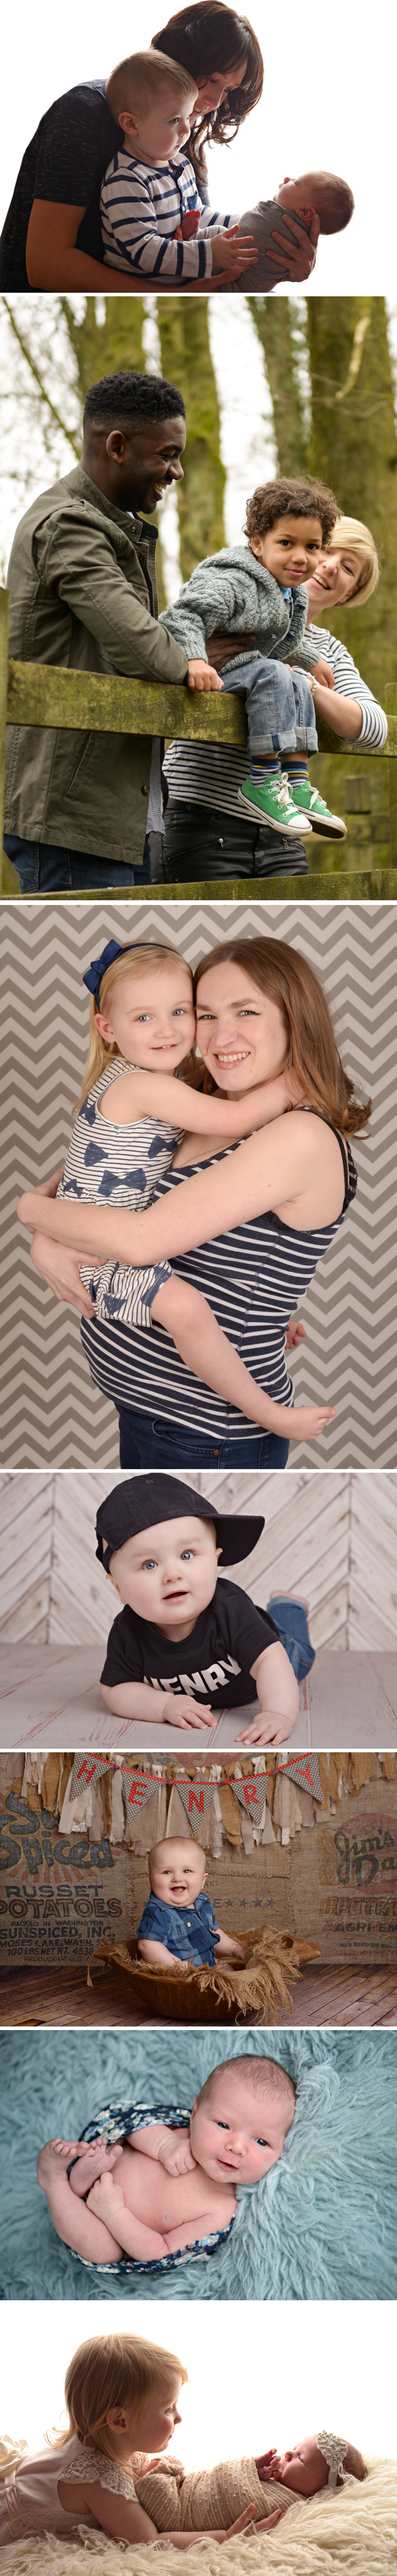 Newborn, Baby, Children & Family Photography Studio Manchester - March Photo Shoots - Bubbaloo Photography